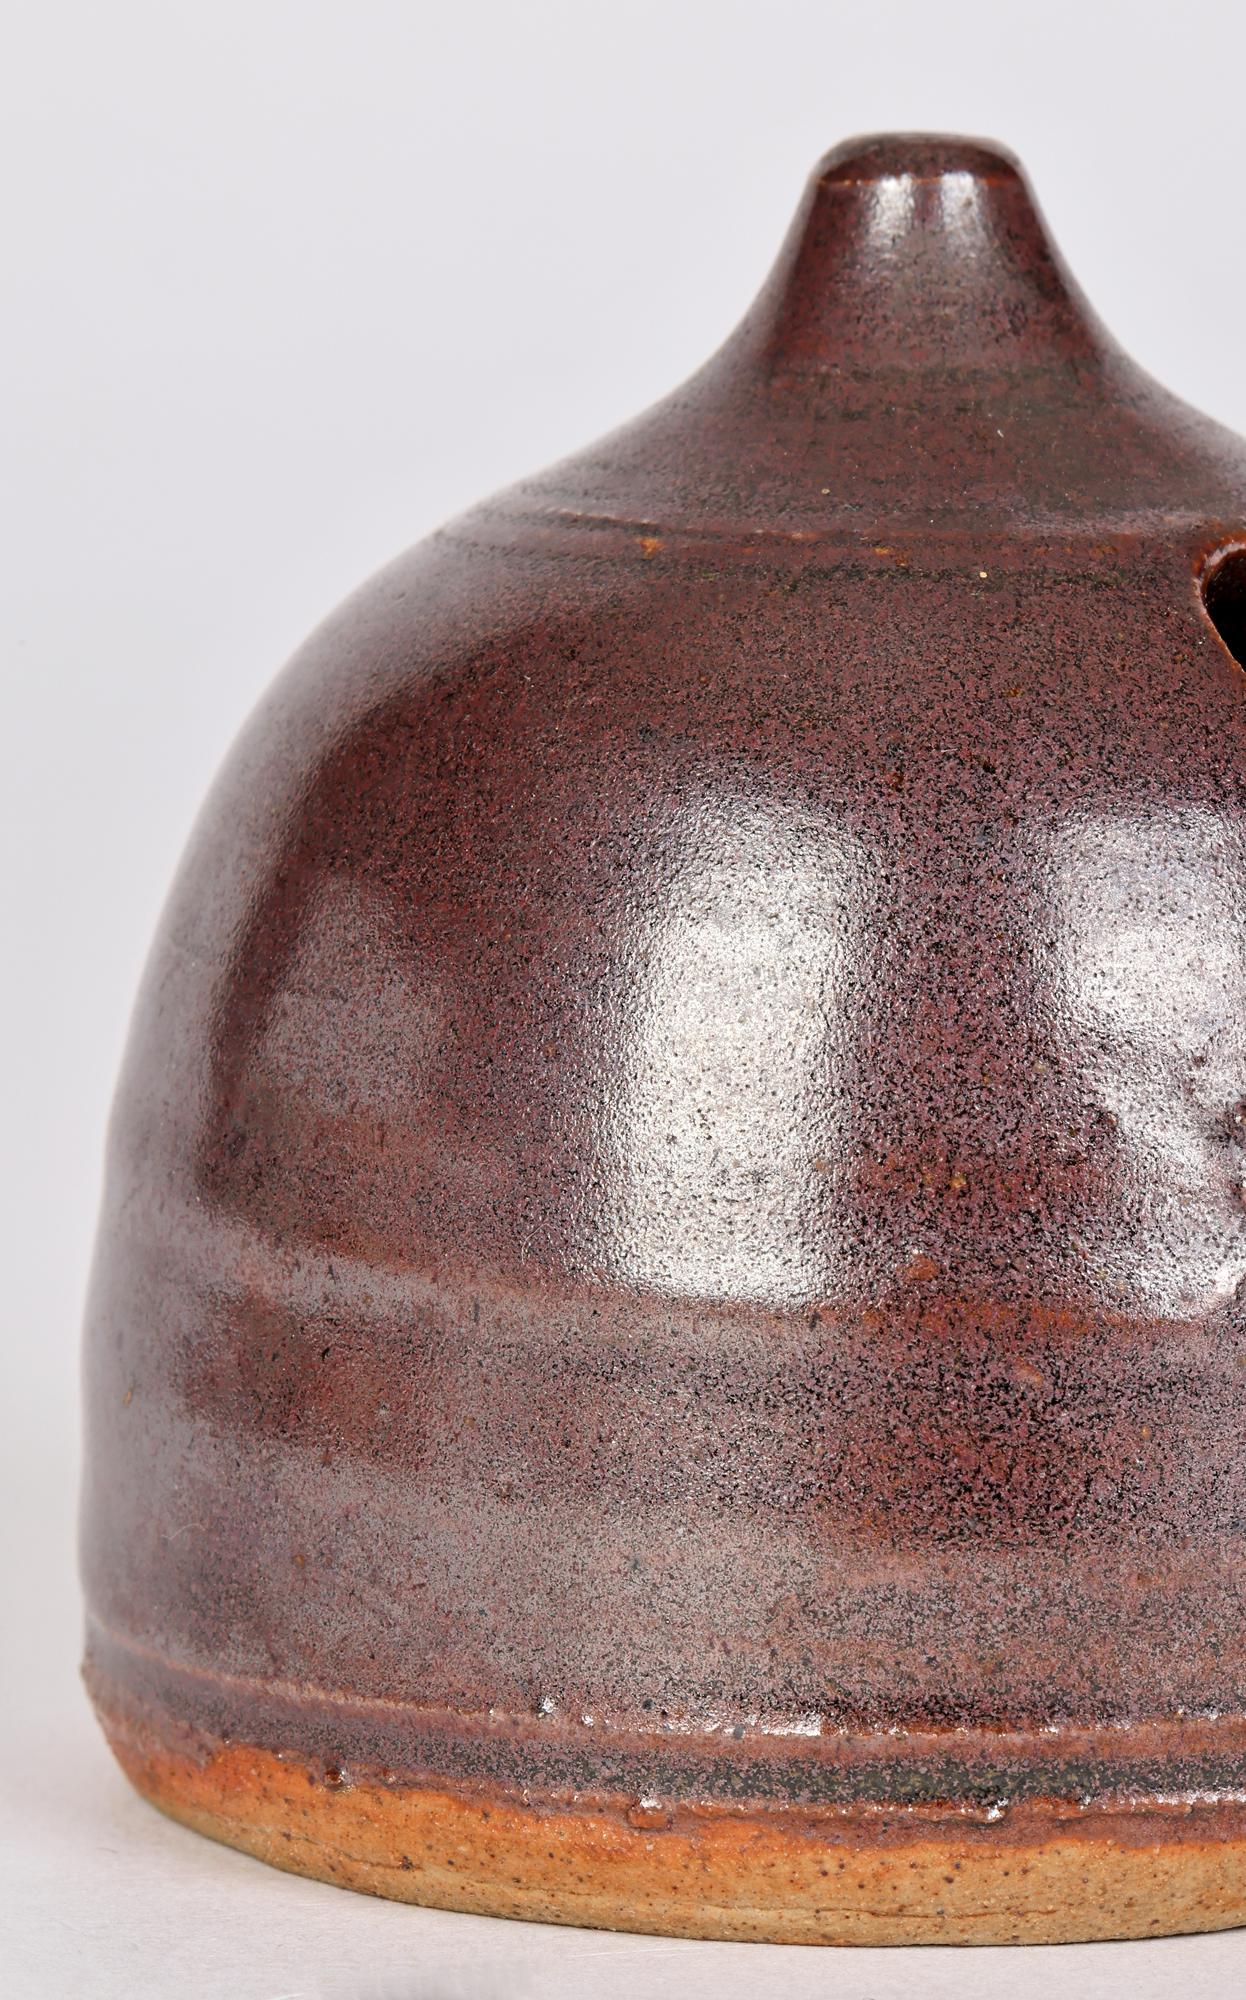 An unusual and finely hand crafted studio pottery water dropper or inkwell decorated in brown glazes dating from the 20th century. The hand thrown hive shaped vessel stands on a flat round unglazed base with a combed finish with a rounded body